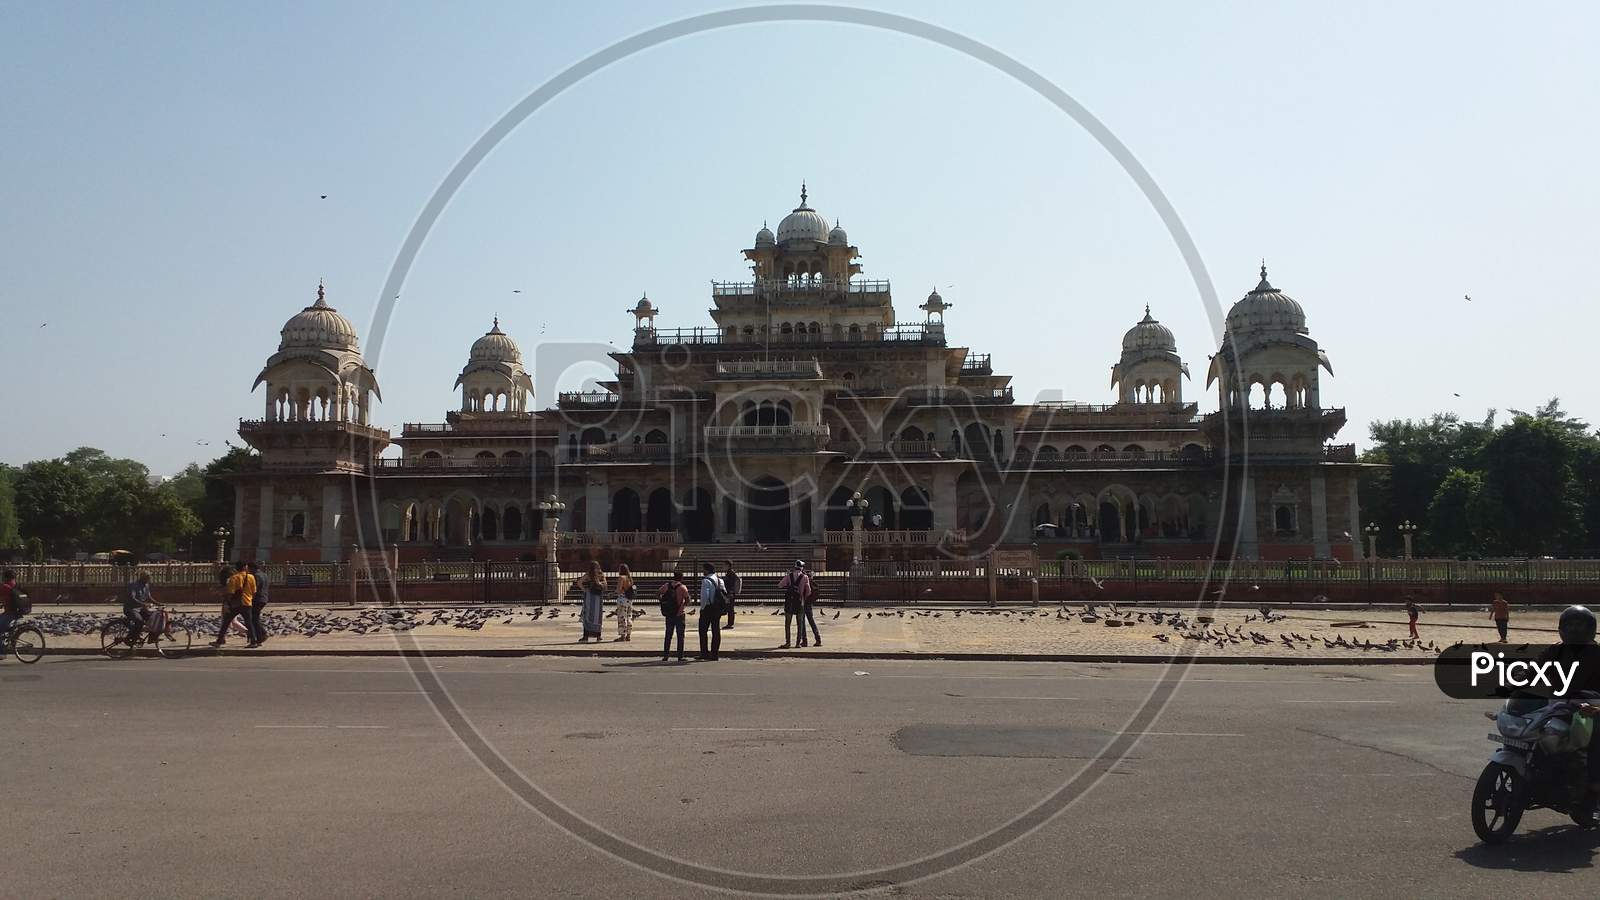 Albert Hall Museum is the oldest museum of the state and functions as the state museum of Rajasthan. The building is situated in Ram Niwas garden outside the city wall opposite New gate and is a fine example of Indo-Saracenic architecture. It is also called the Government Central Museum